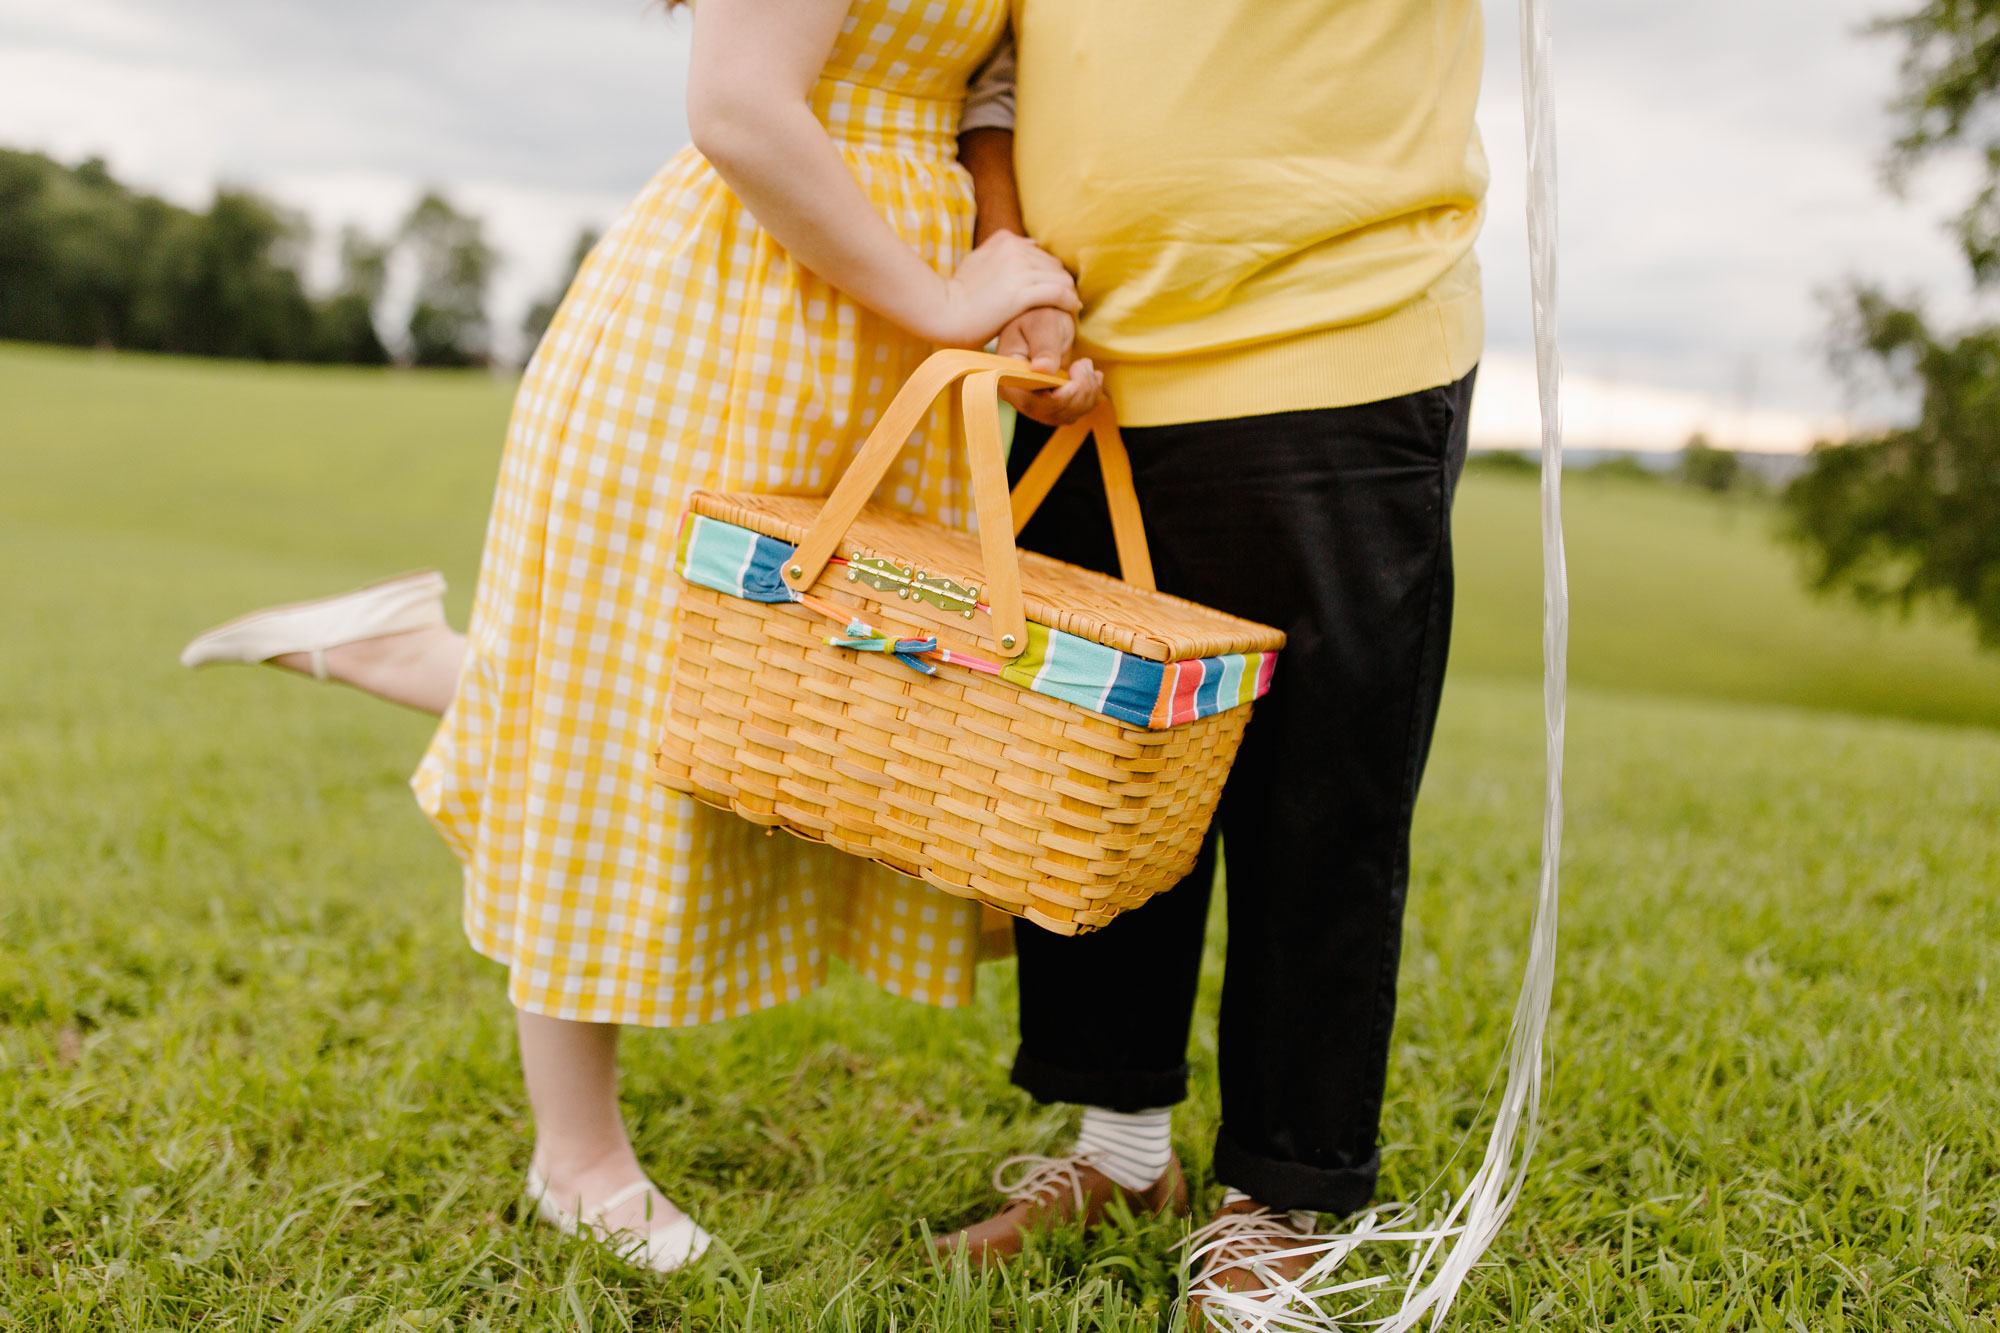 Up Themed Engagement Session